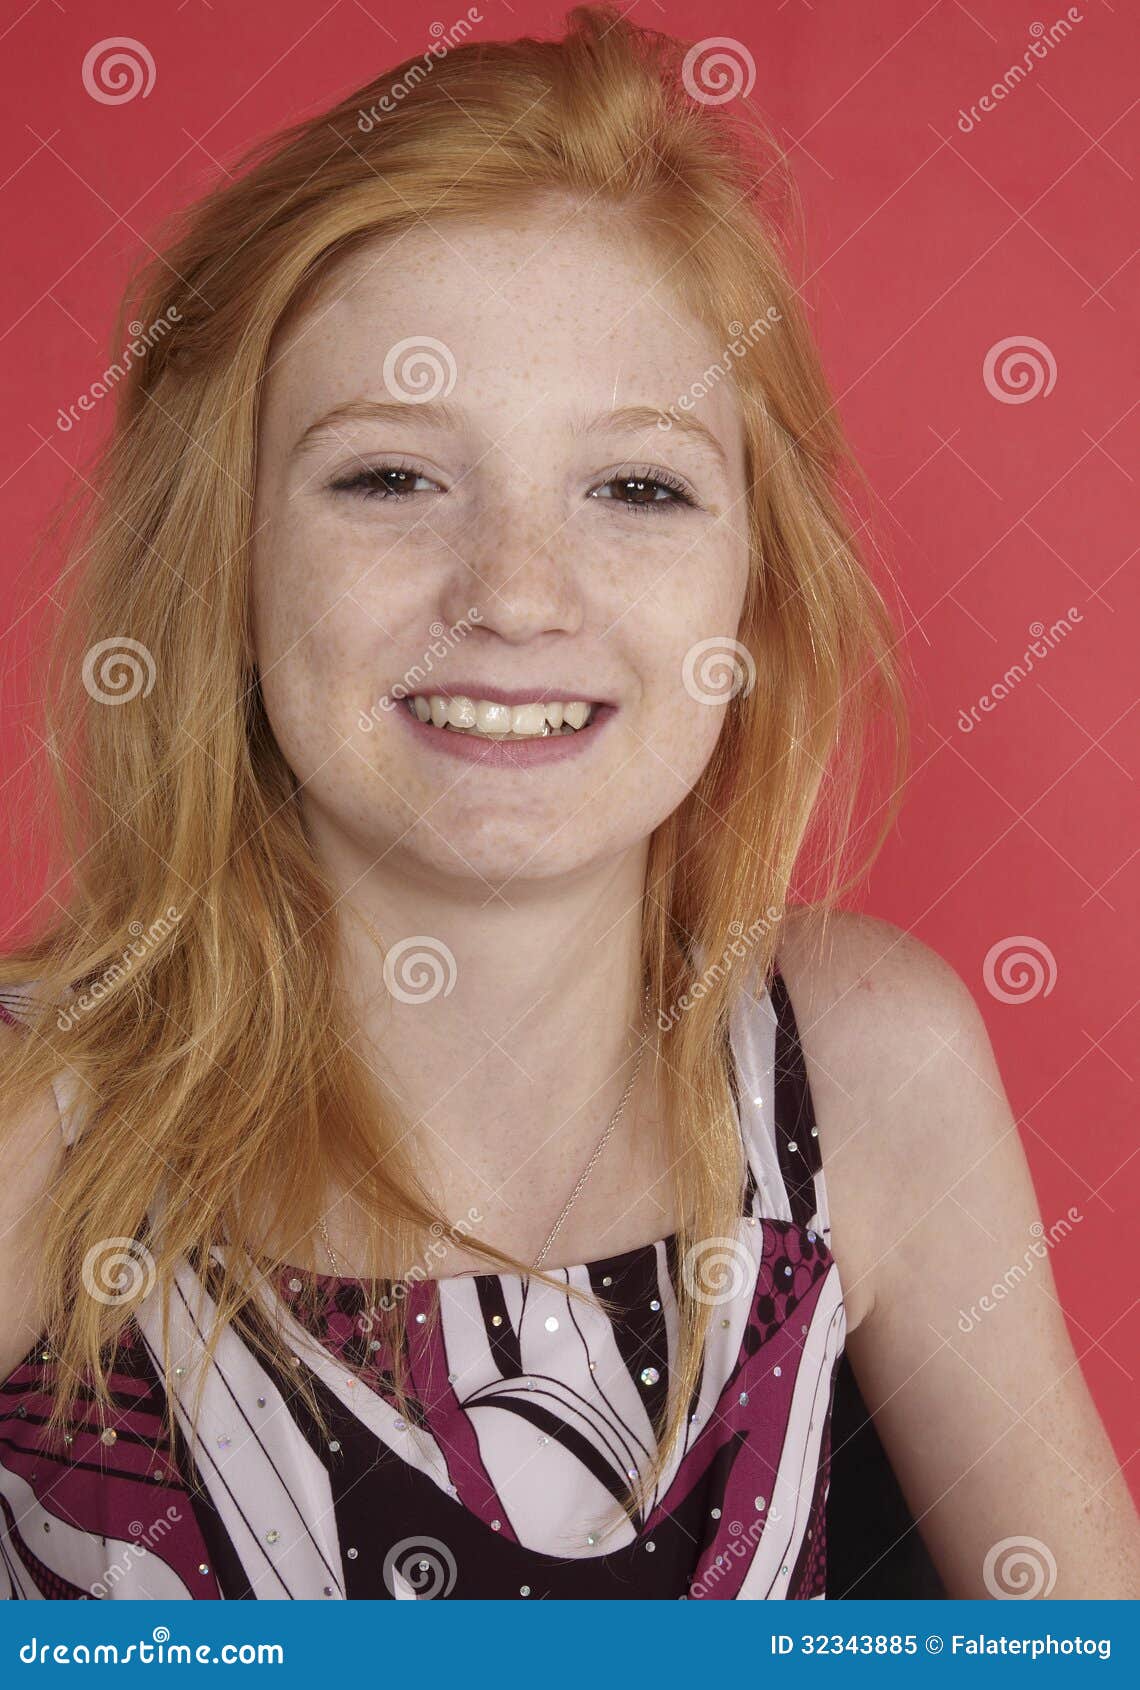 Barely Legal Teen Red Head